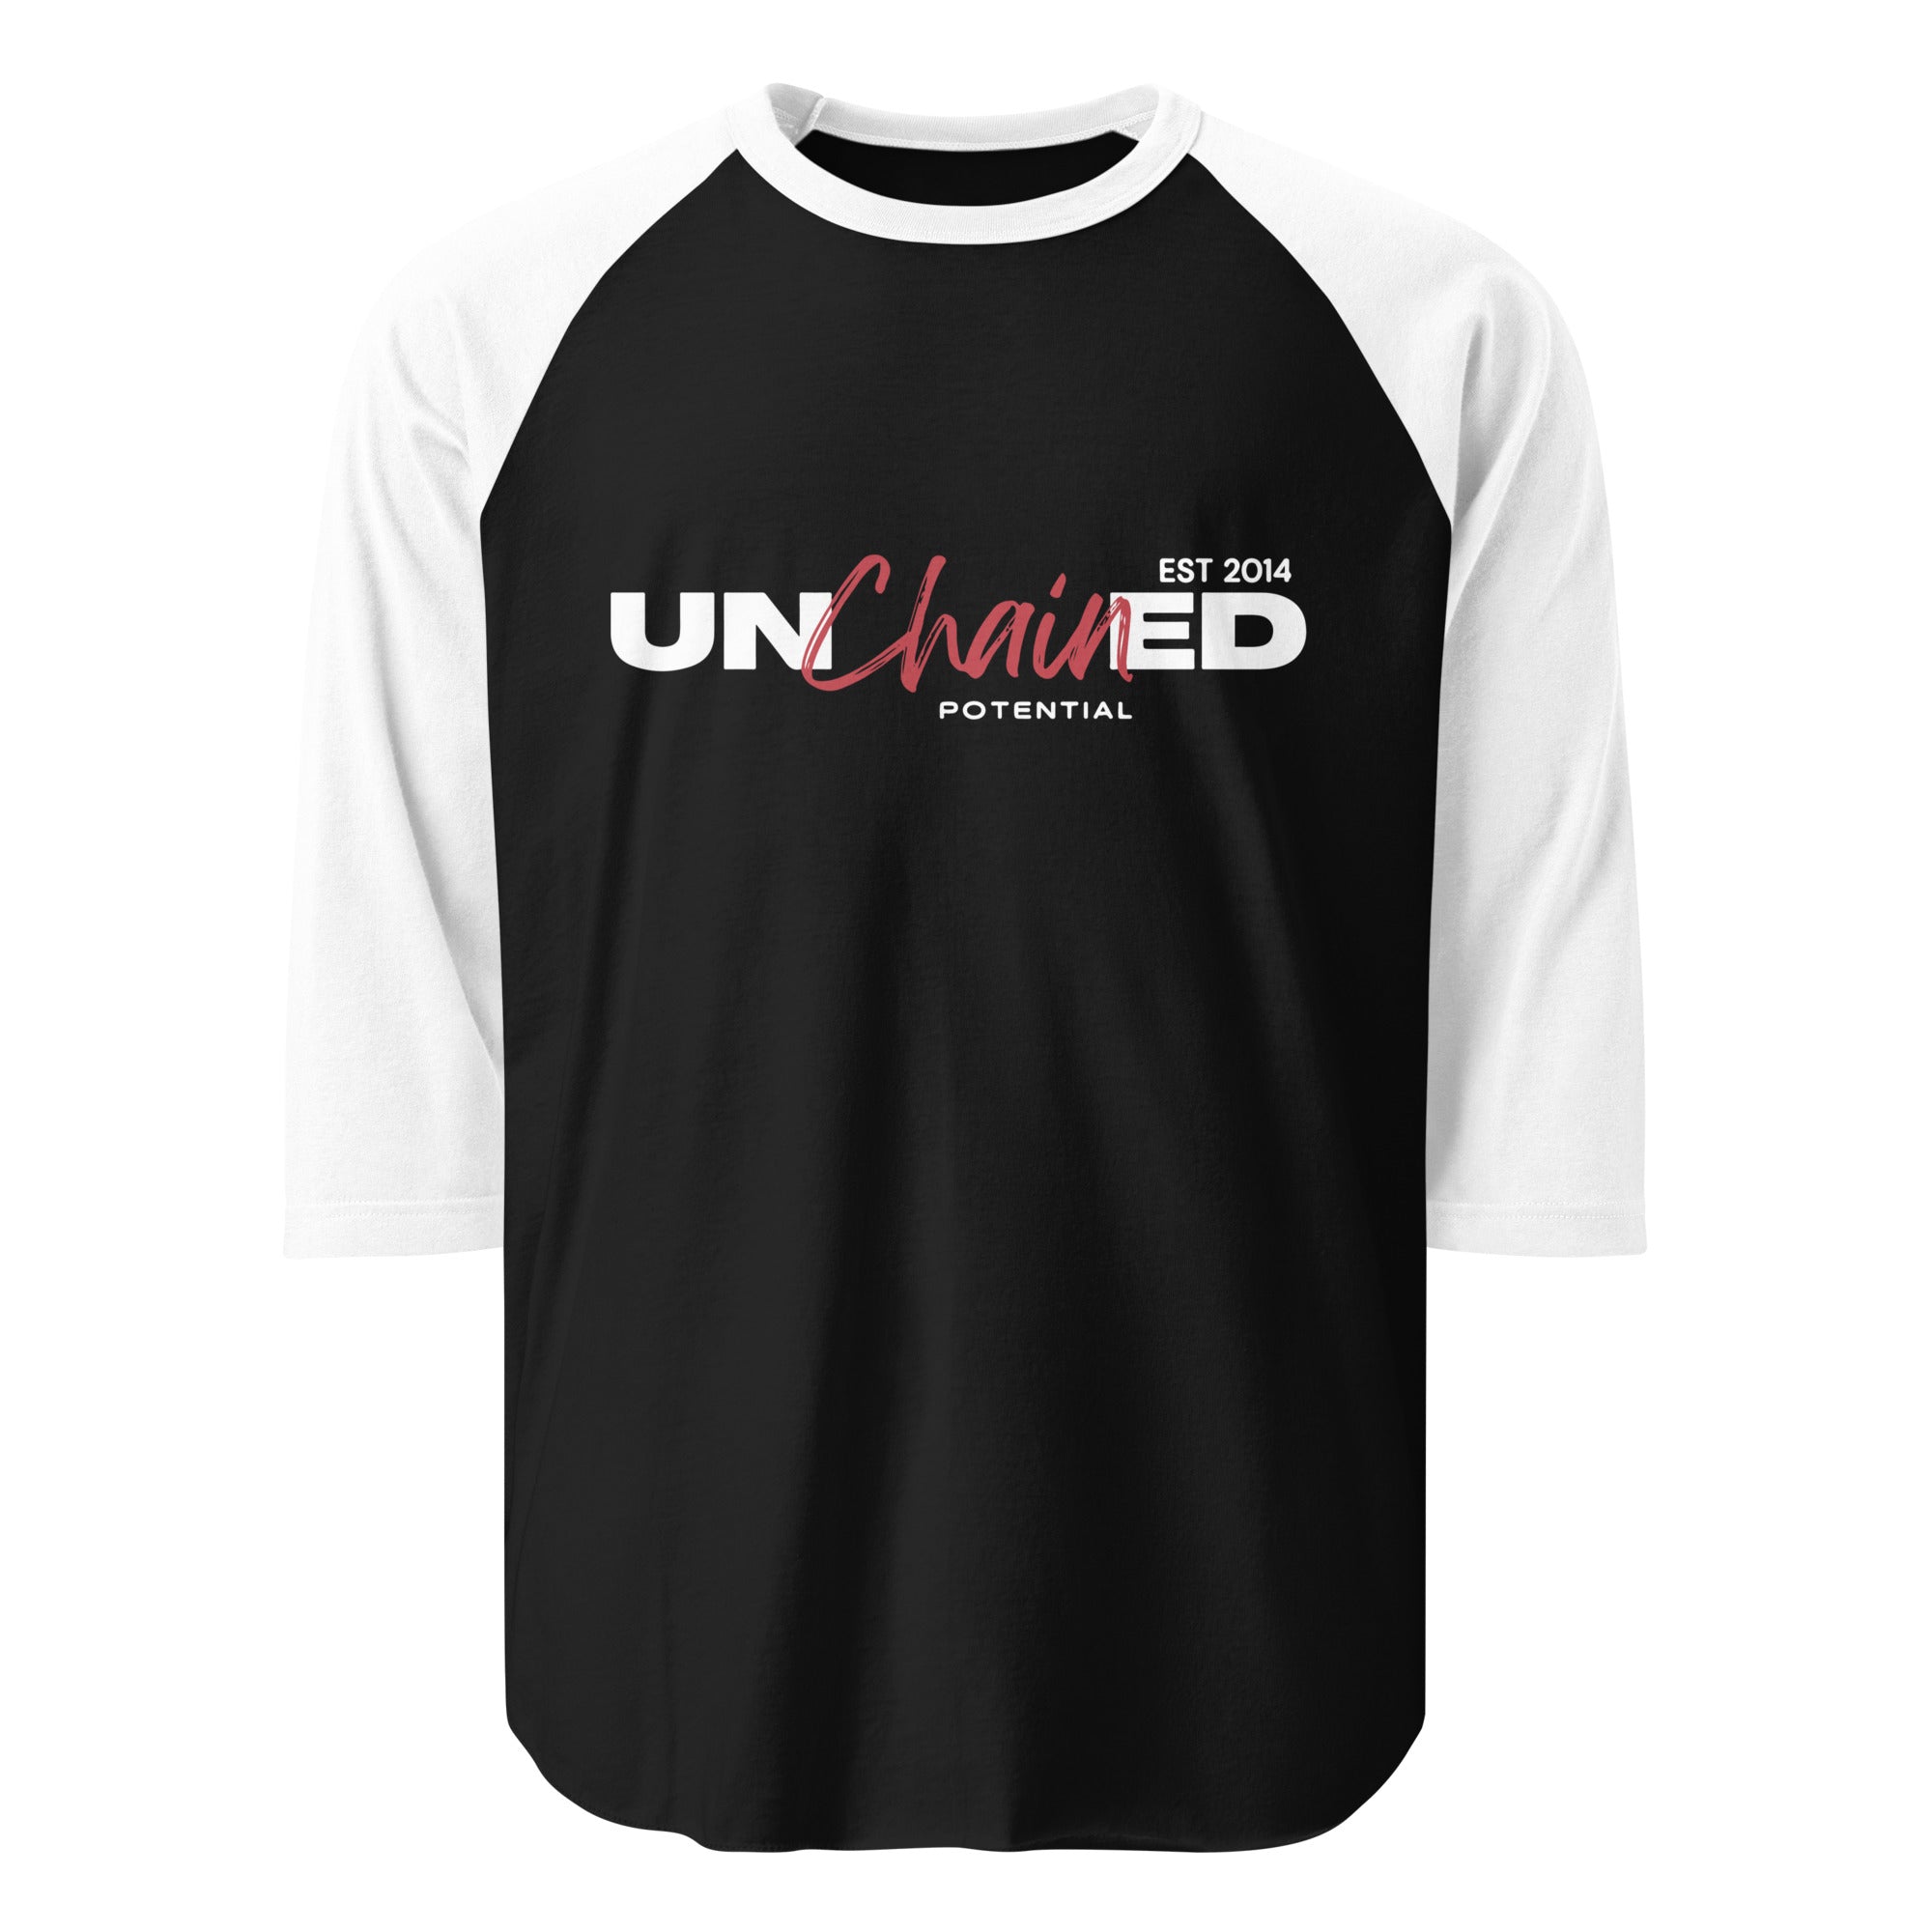 Unchained Potential 3/4 sleeve raglan shirt v2